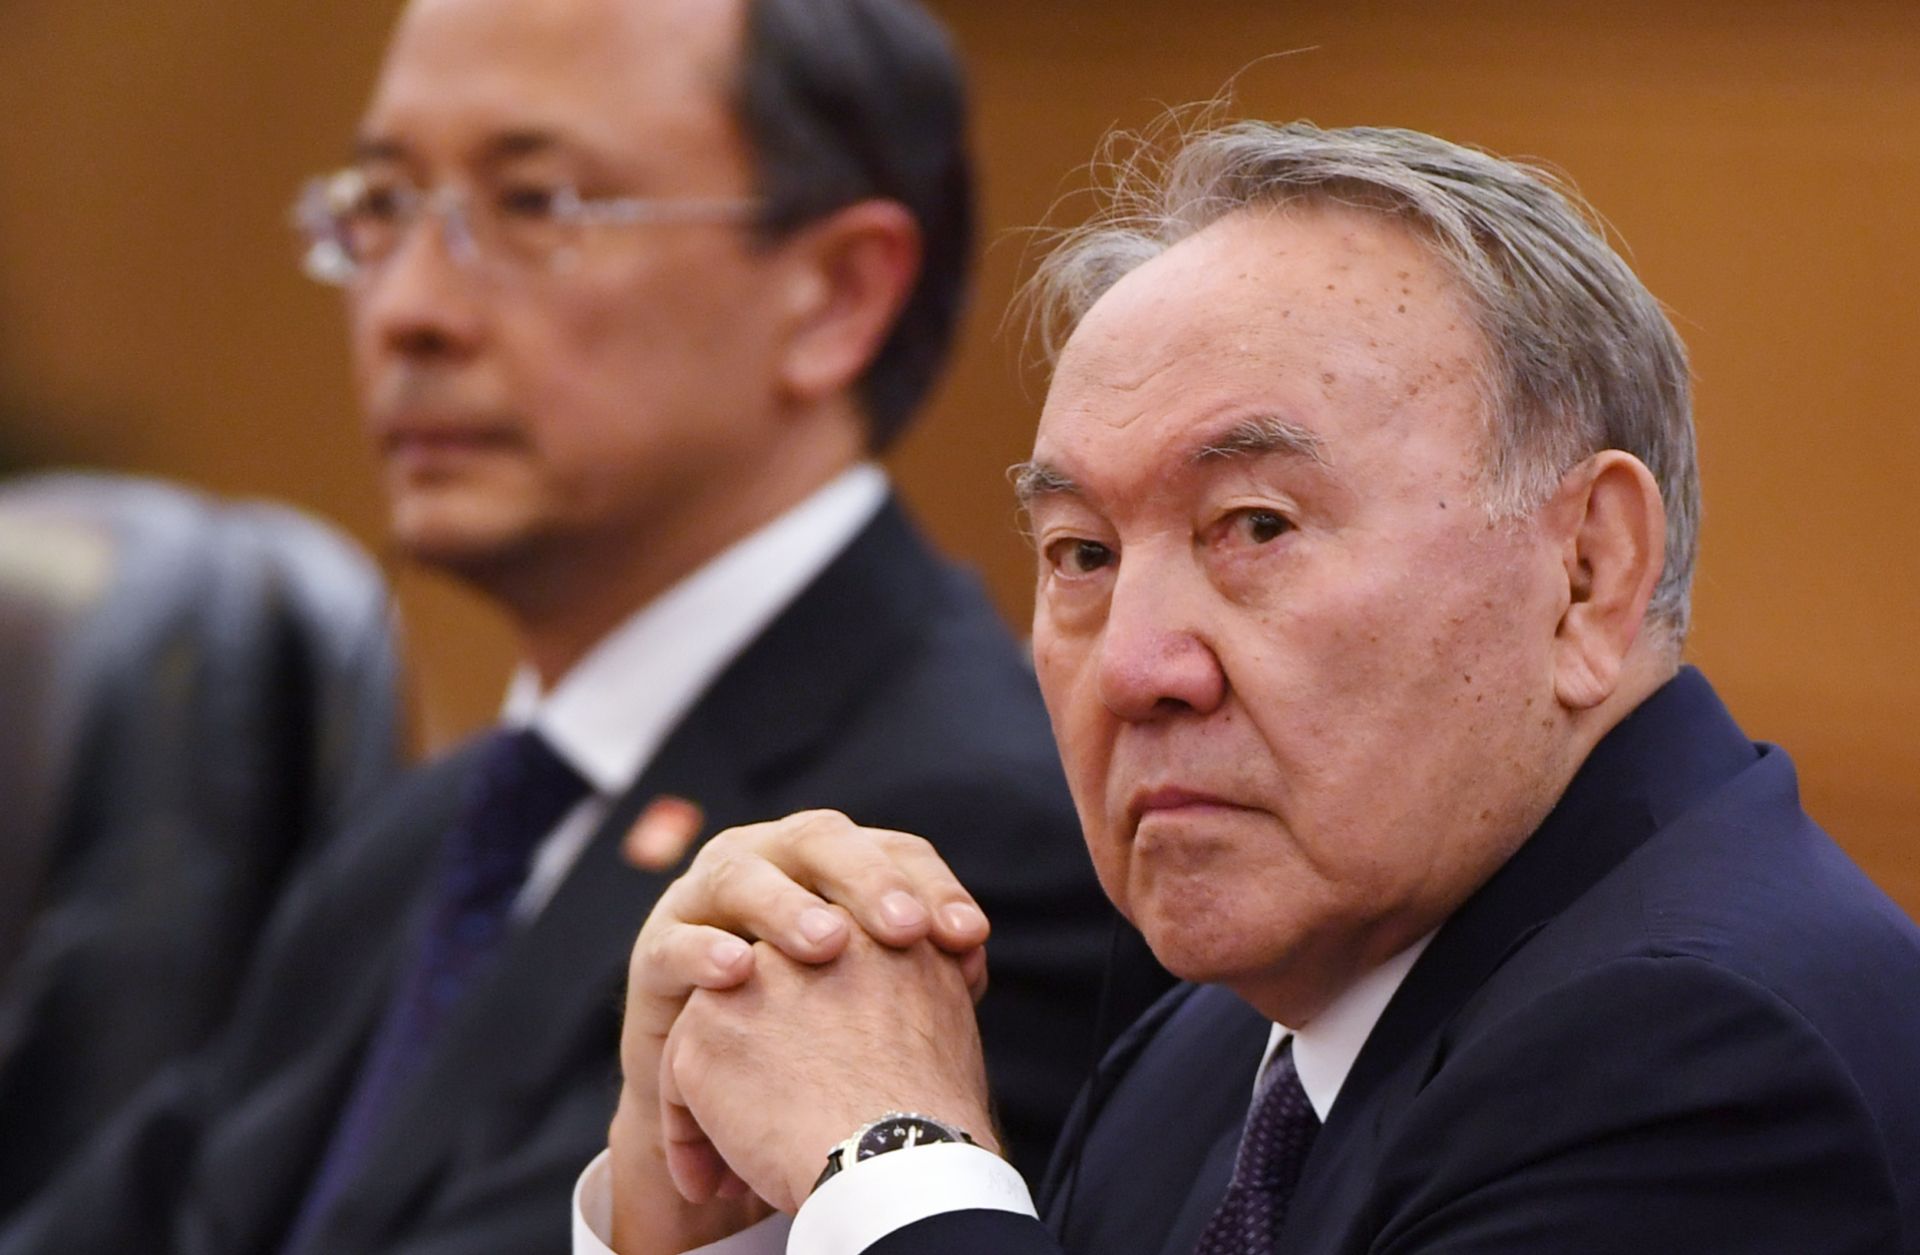 Kazakh President Nursultan Nazarbayev is pictured here on June 7, 2018, during a visit to Beijing.